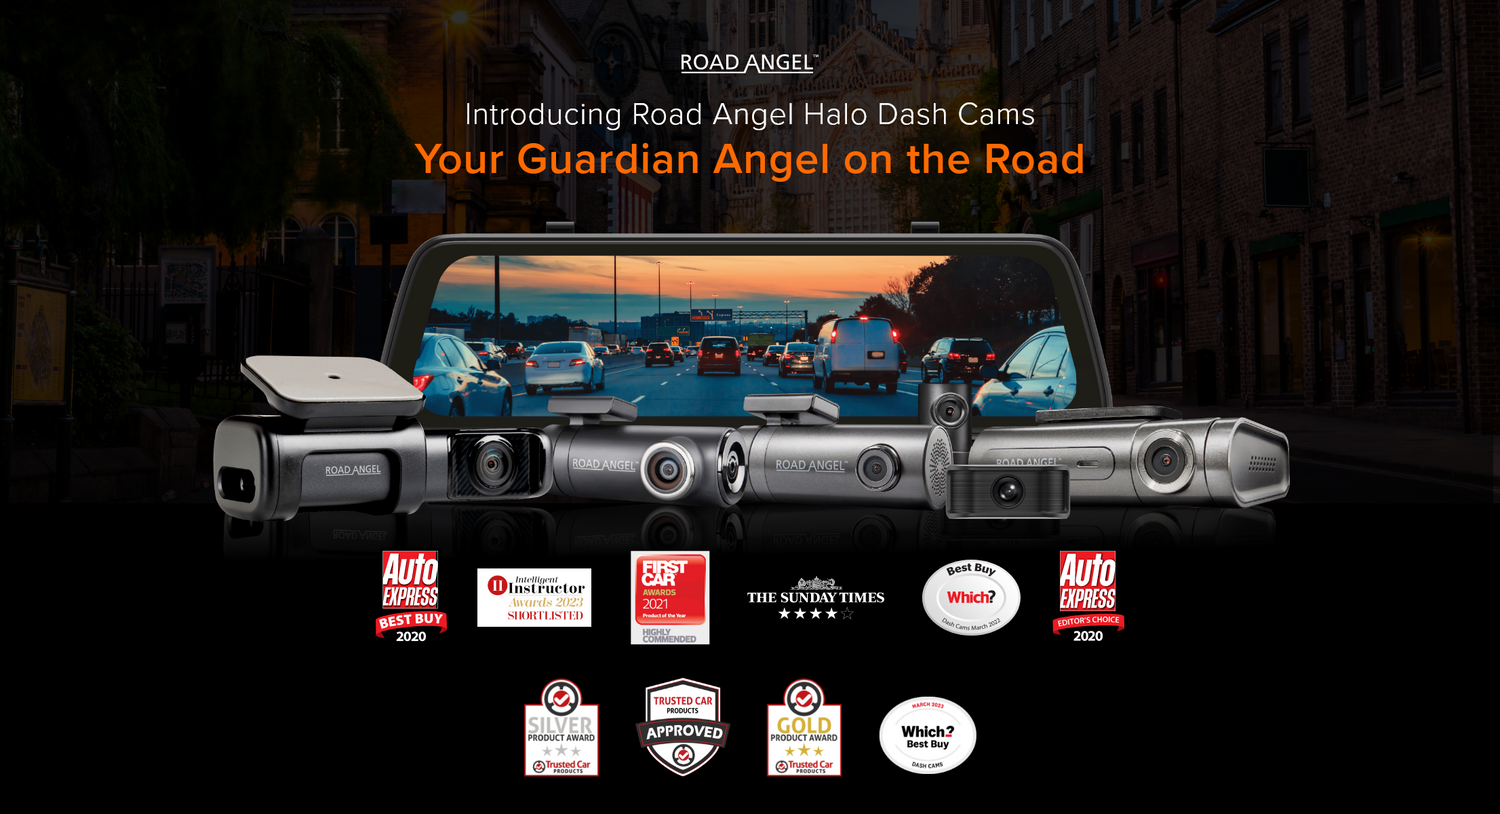 Introducing Road Angel Halo Dash Cams: Your Guardian Angel on the Road